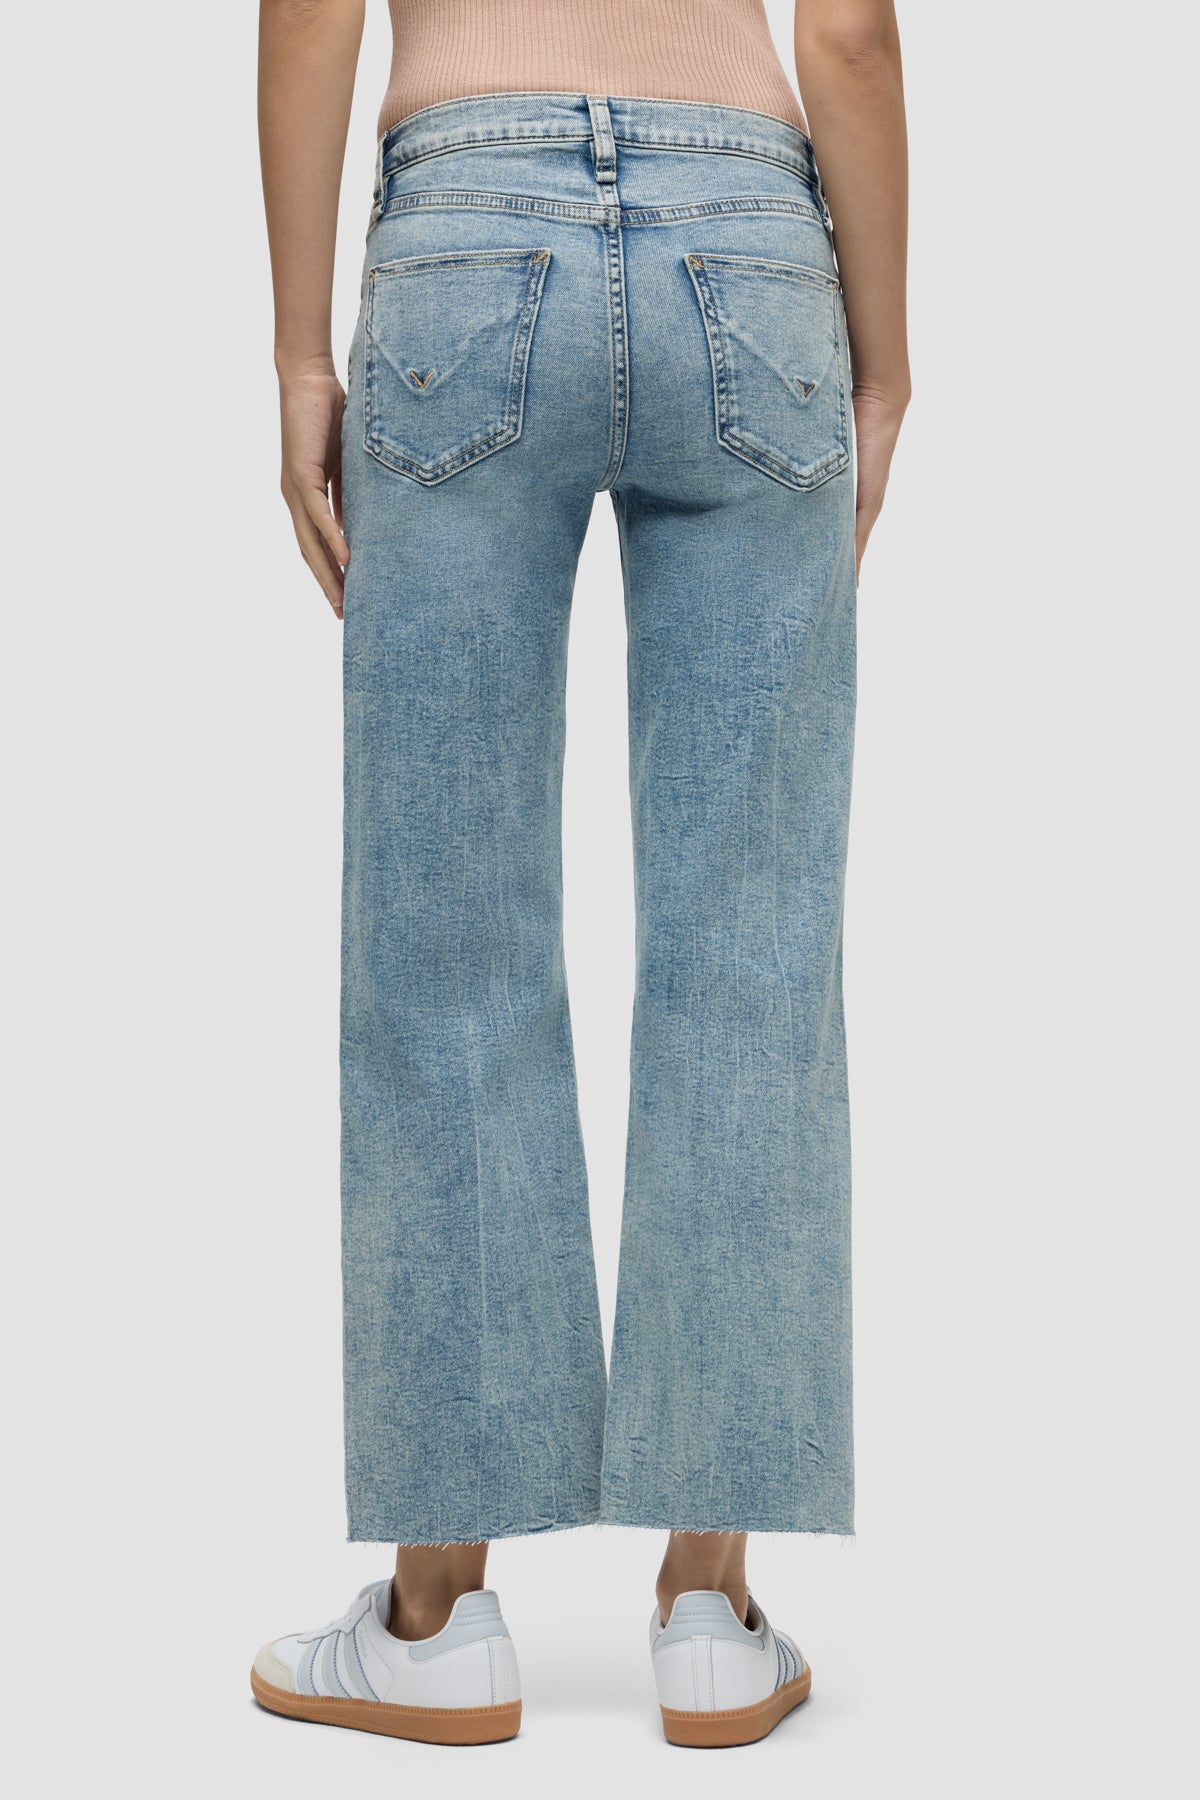 NEW Rosie High Rise Wide Leg Ankle Jean in Mogul Wash by Hudson Jeans – The  Perfect Provenance